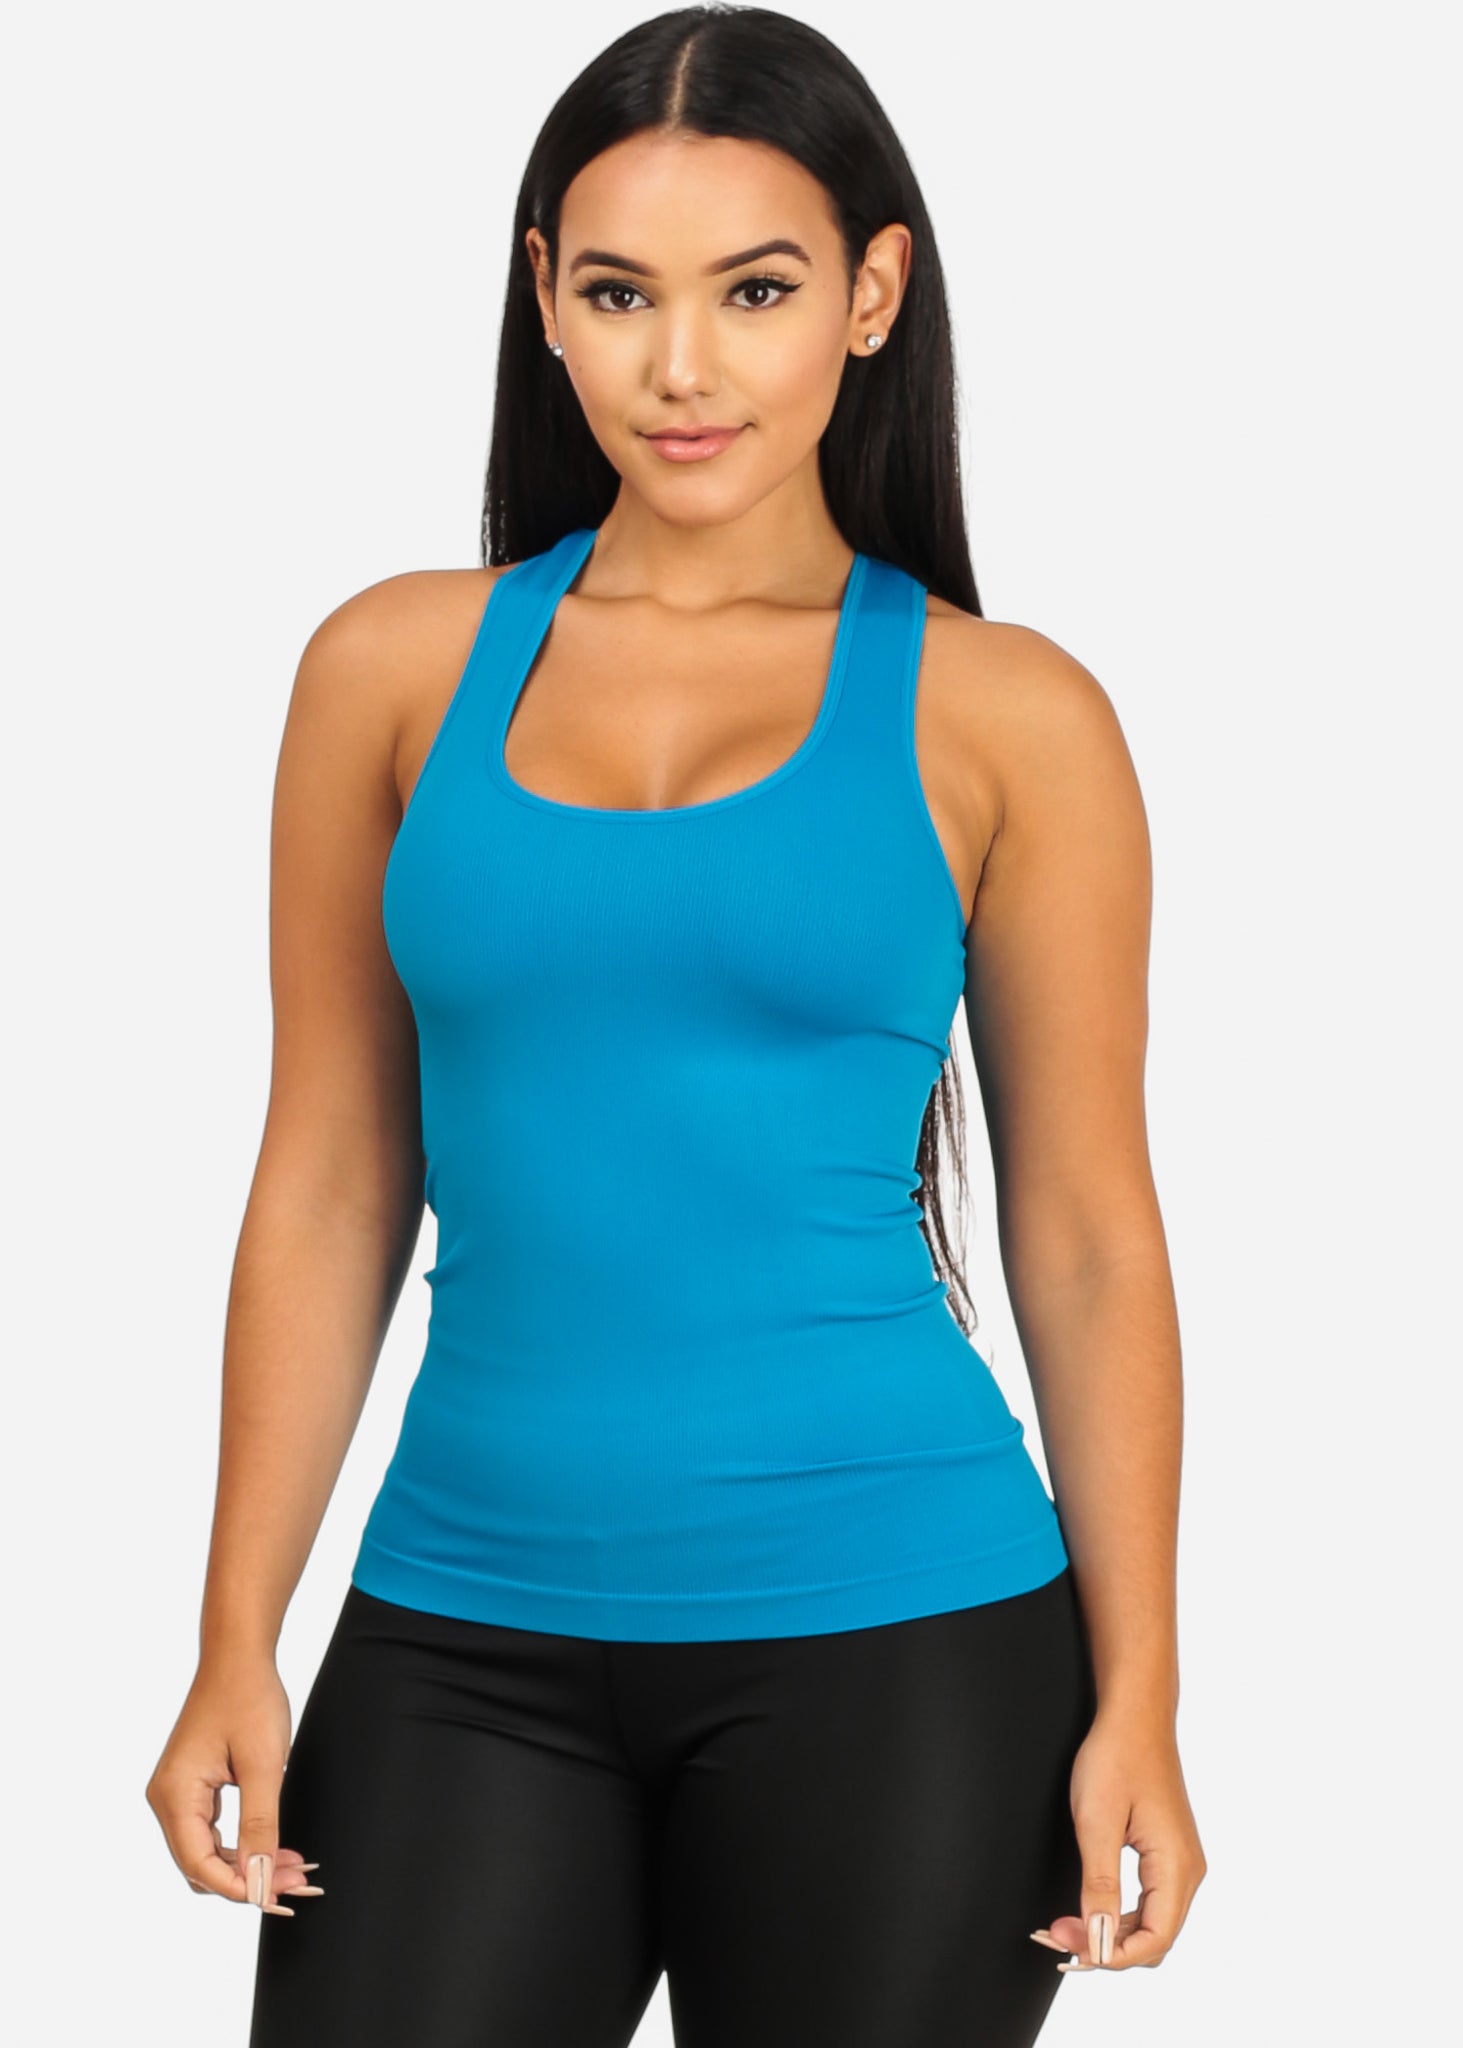 Stretchy Spandex Women's Blue Color Tank Top Tank Top CC-0531 – One Size  Fits